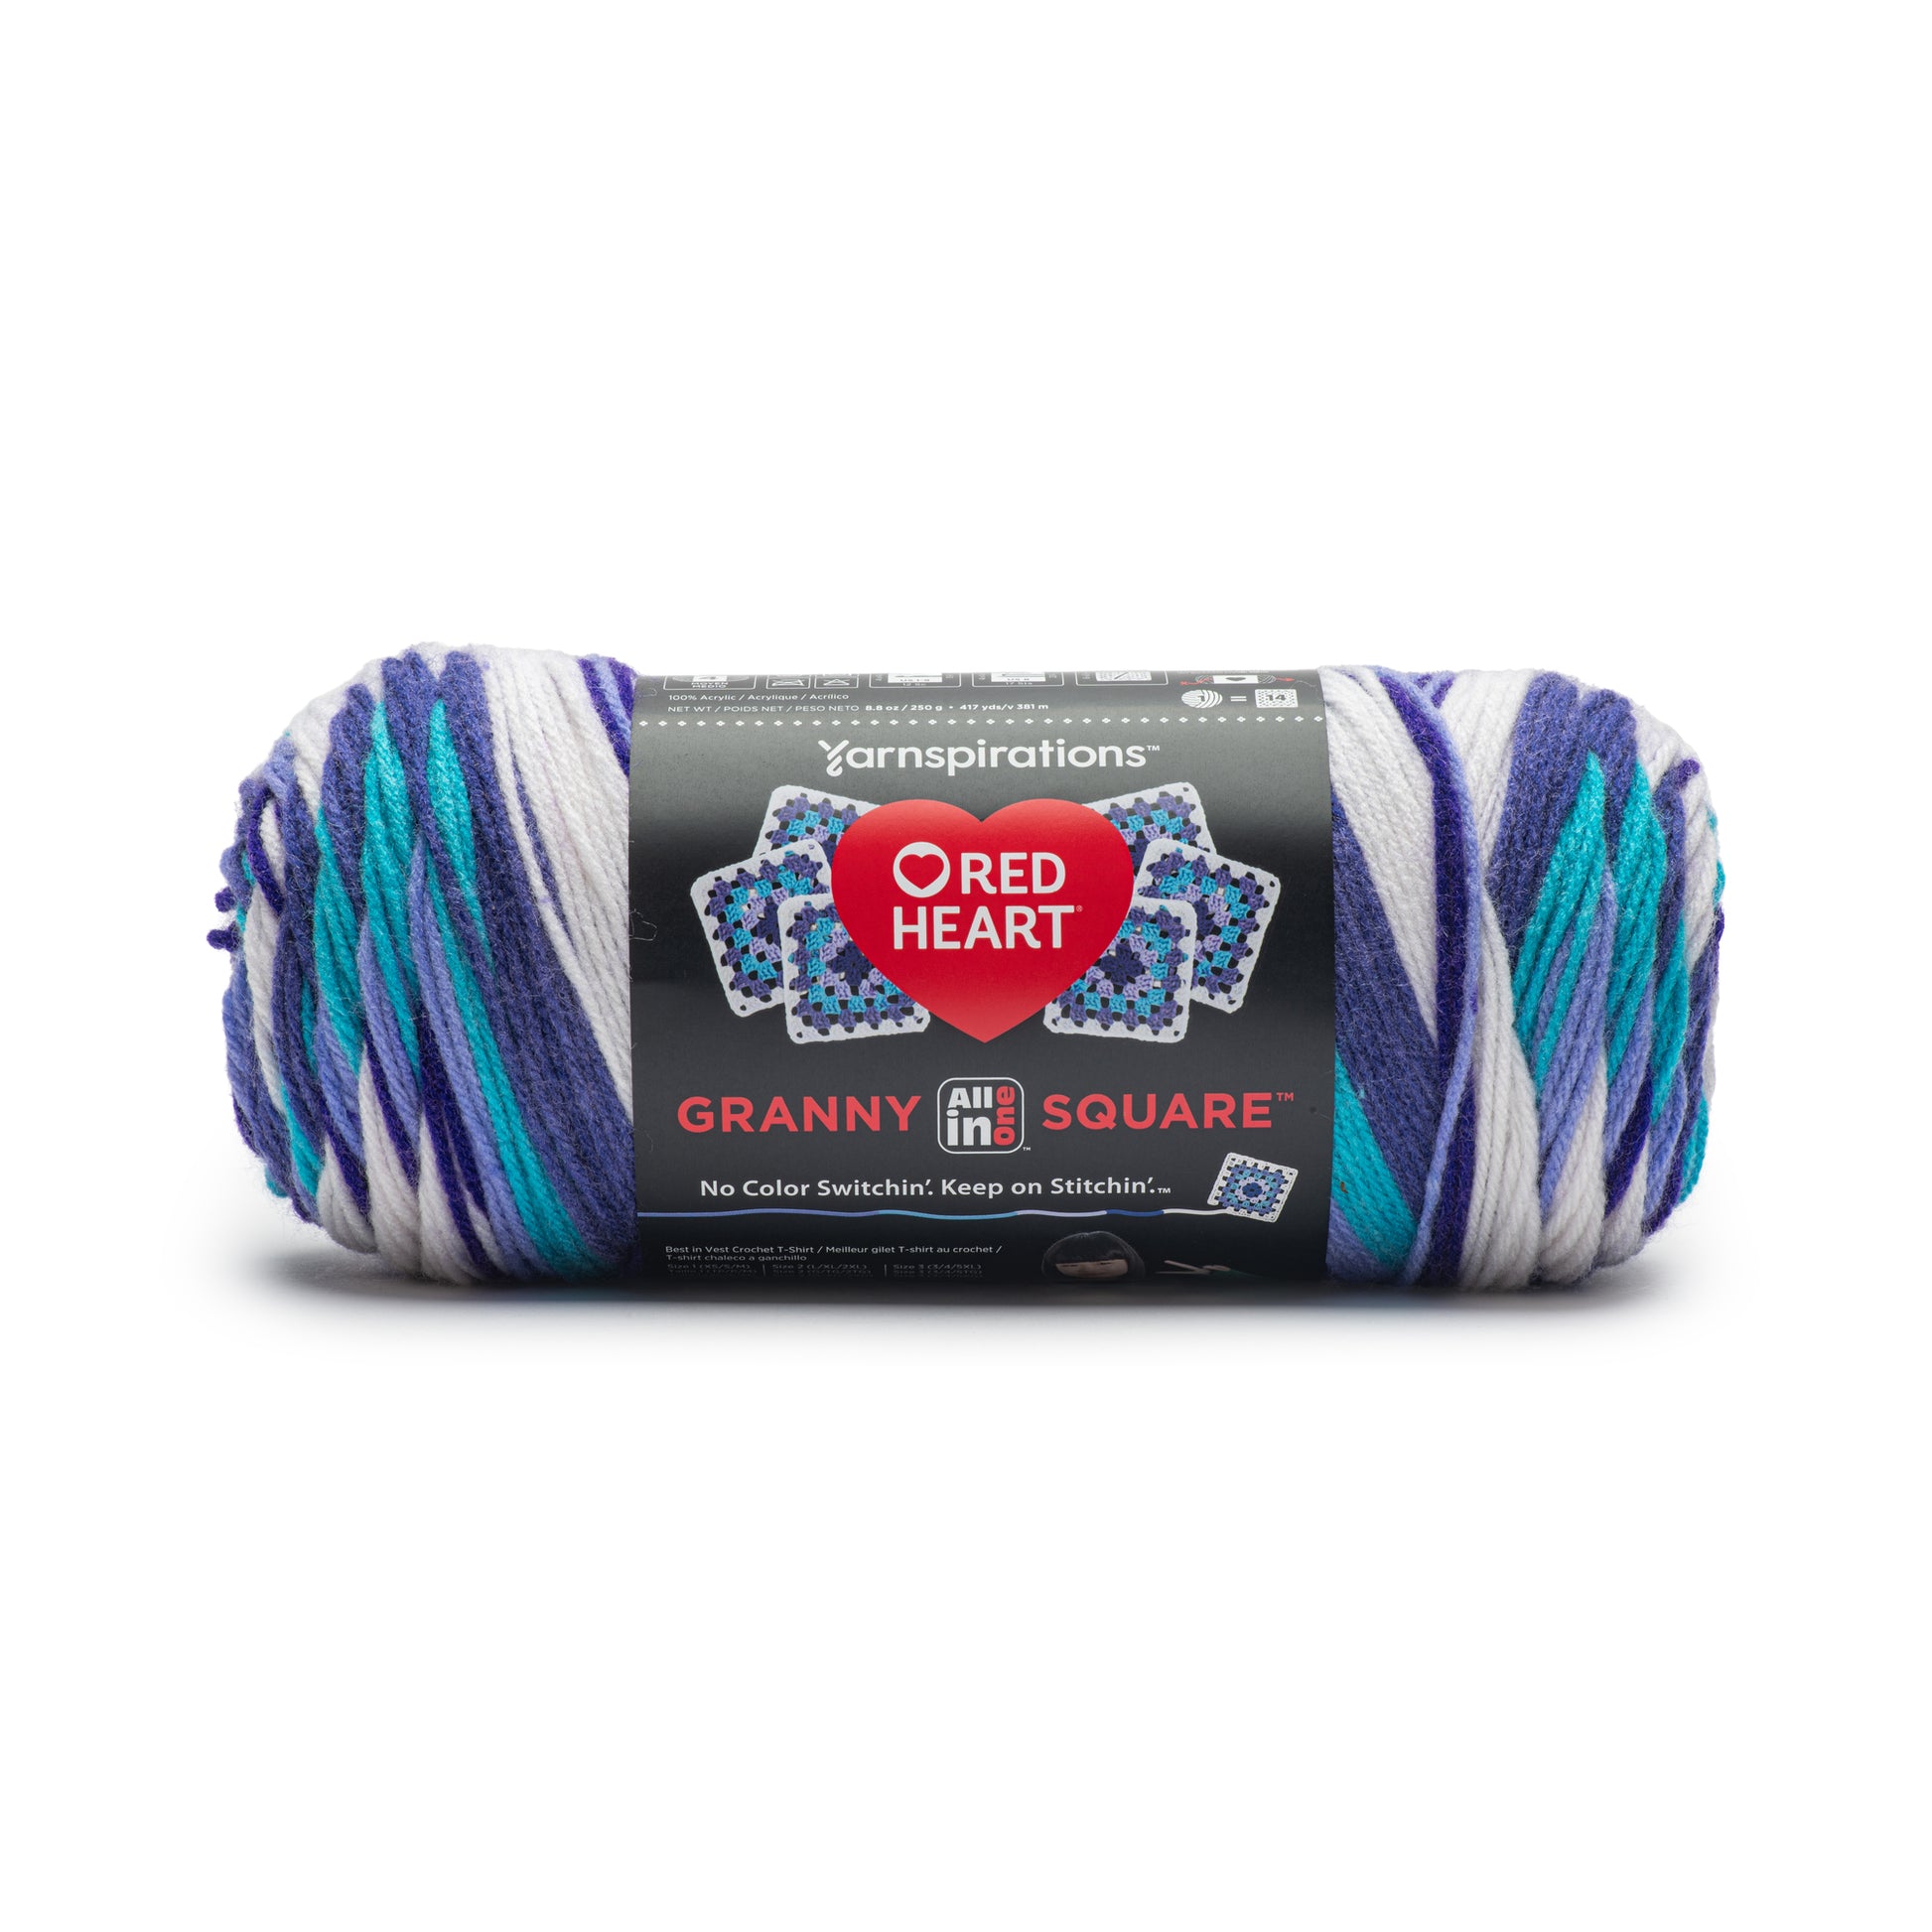 Red Heart All In One Granny Square Yarn (250g/8.8oz) Soft White - Amethyst